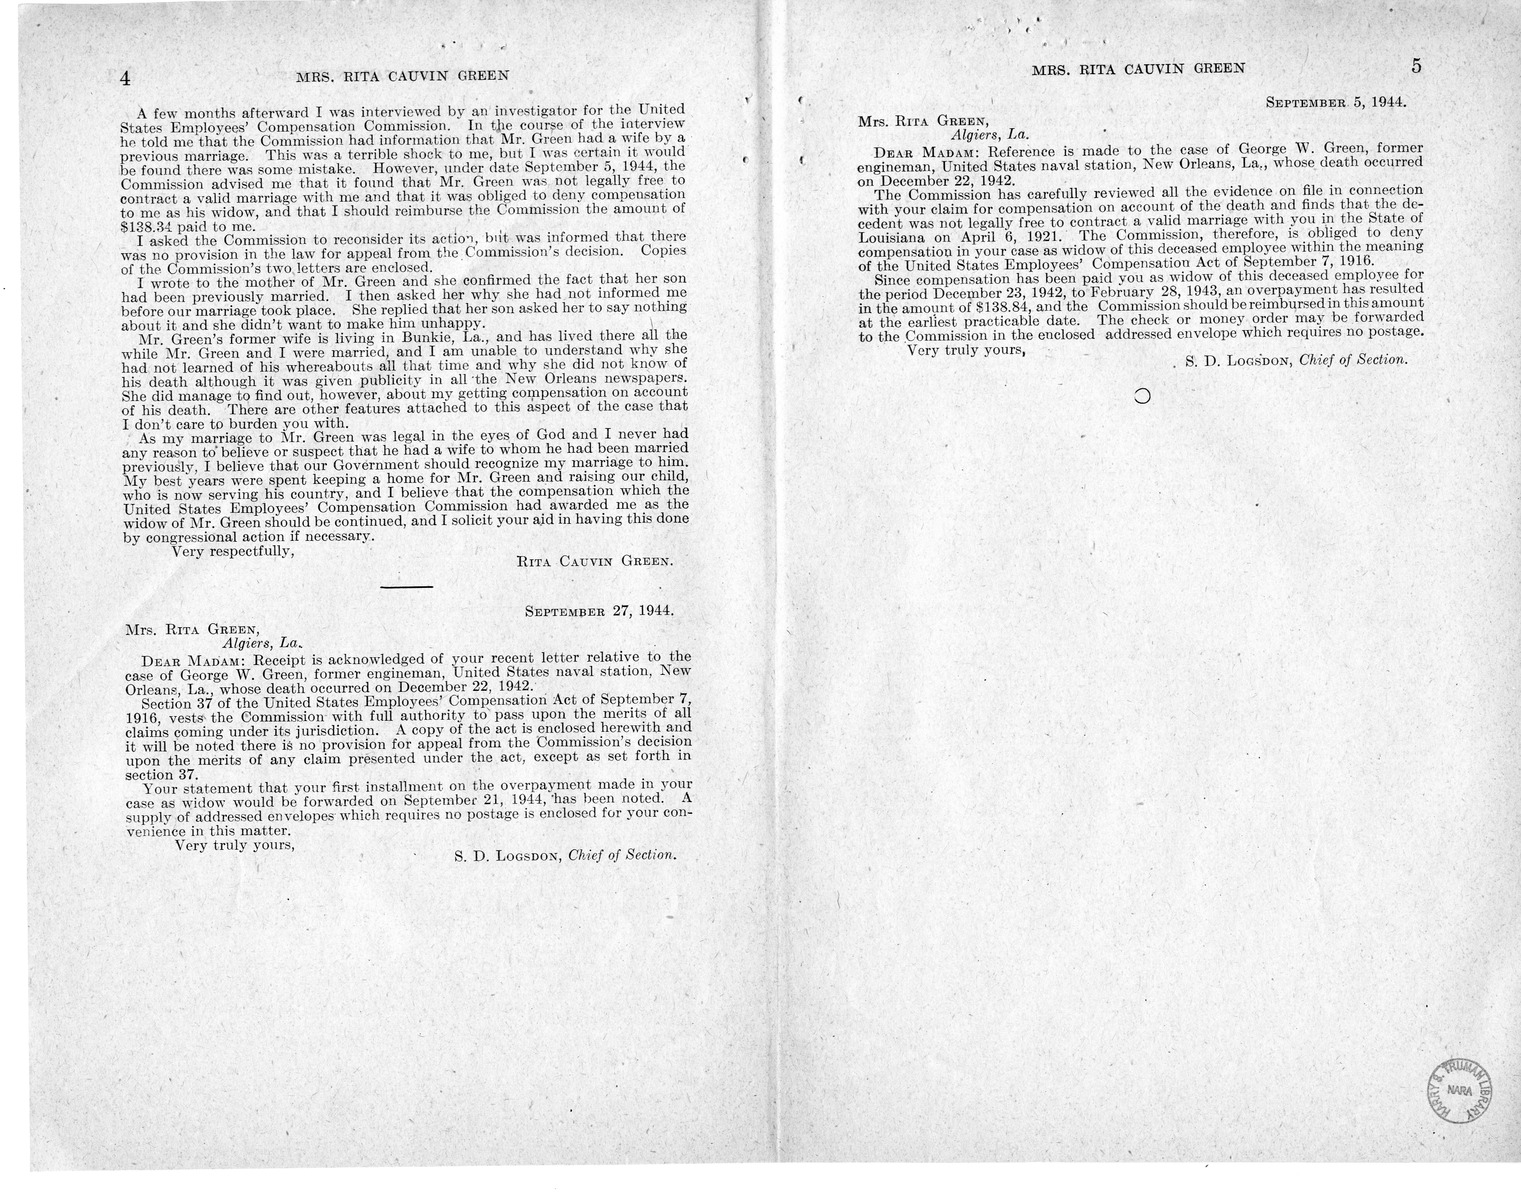 Memorandum from Harold D. Smith to M. C. Latta, H.R. 2866, For the Relief of Mrs. Rita Cauvin Green, with Attachments